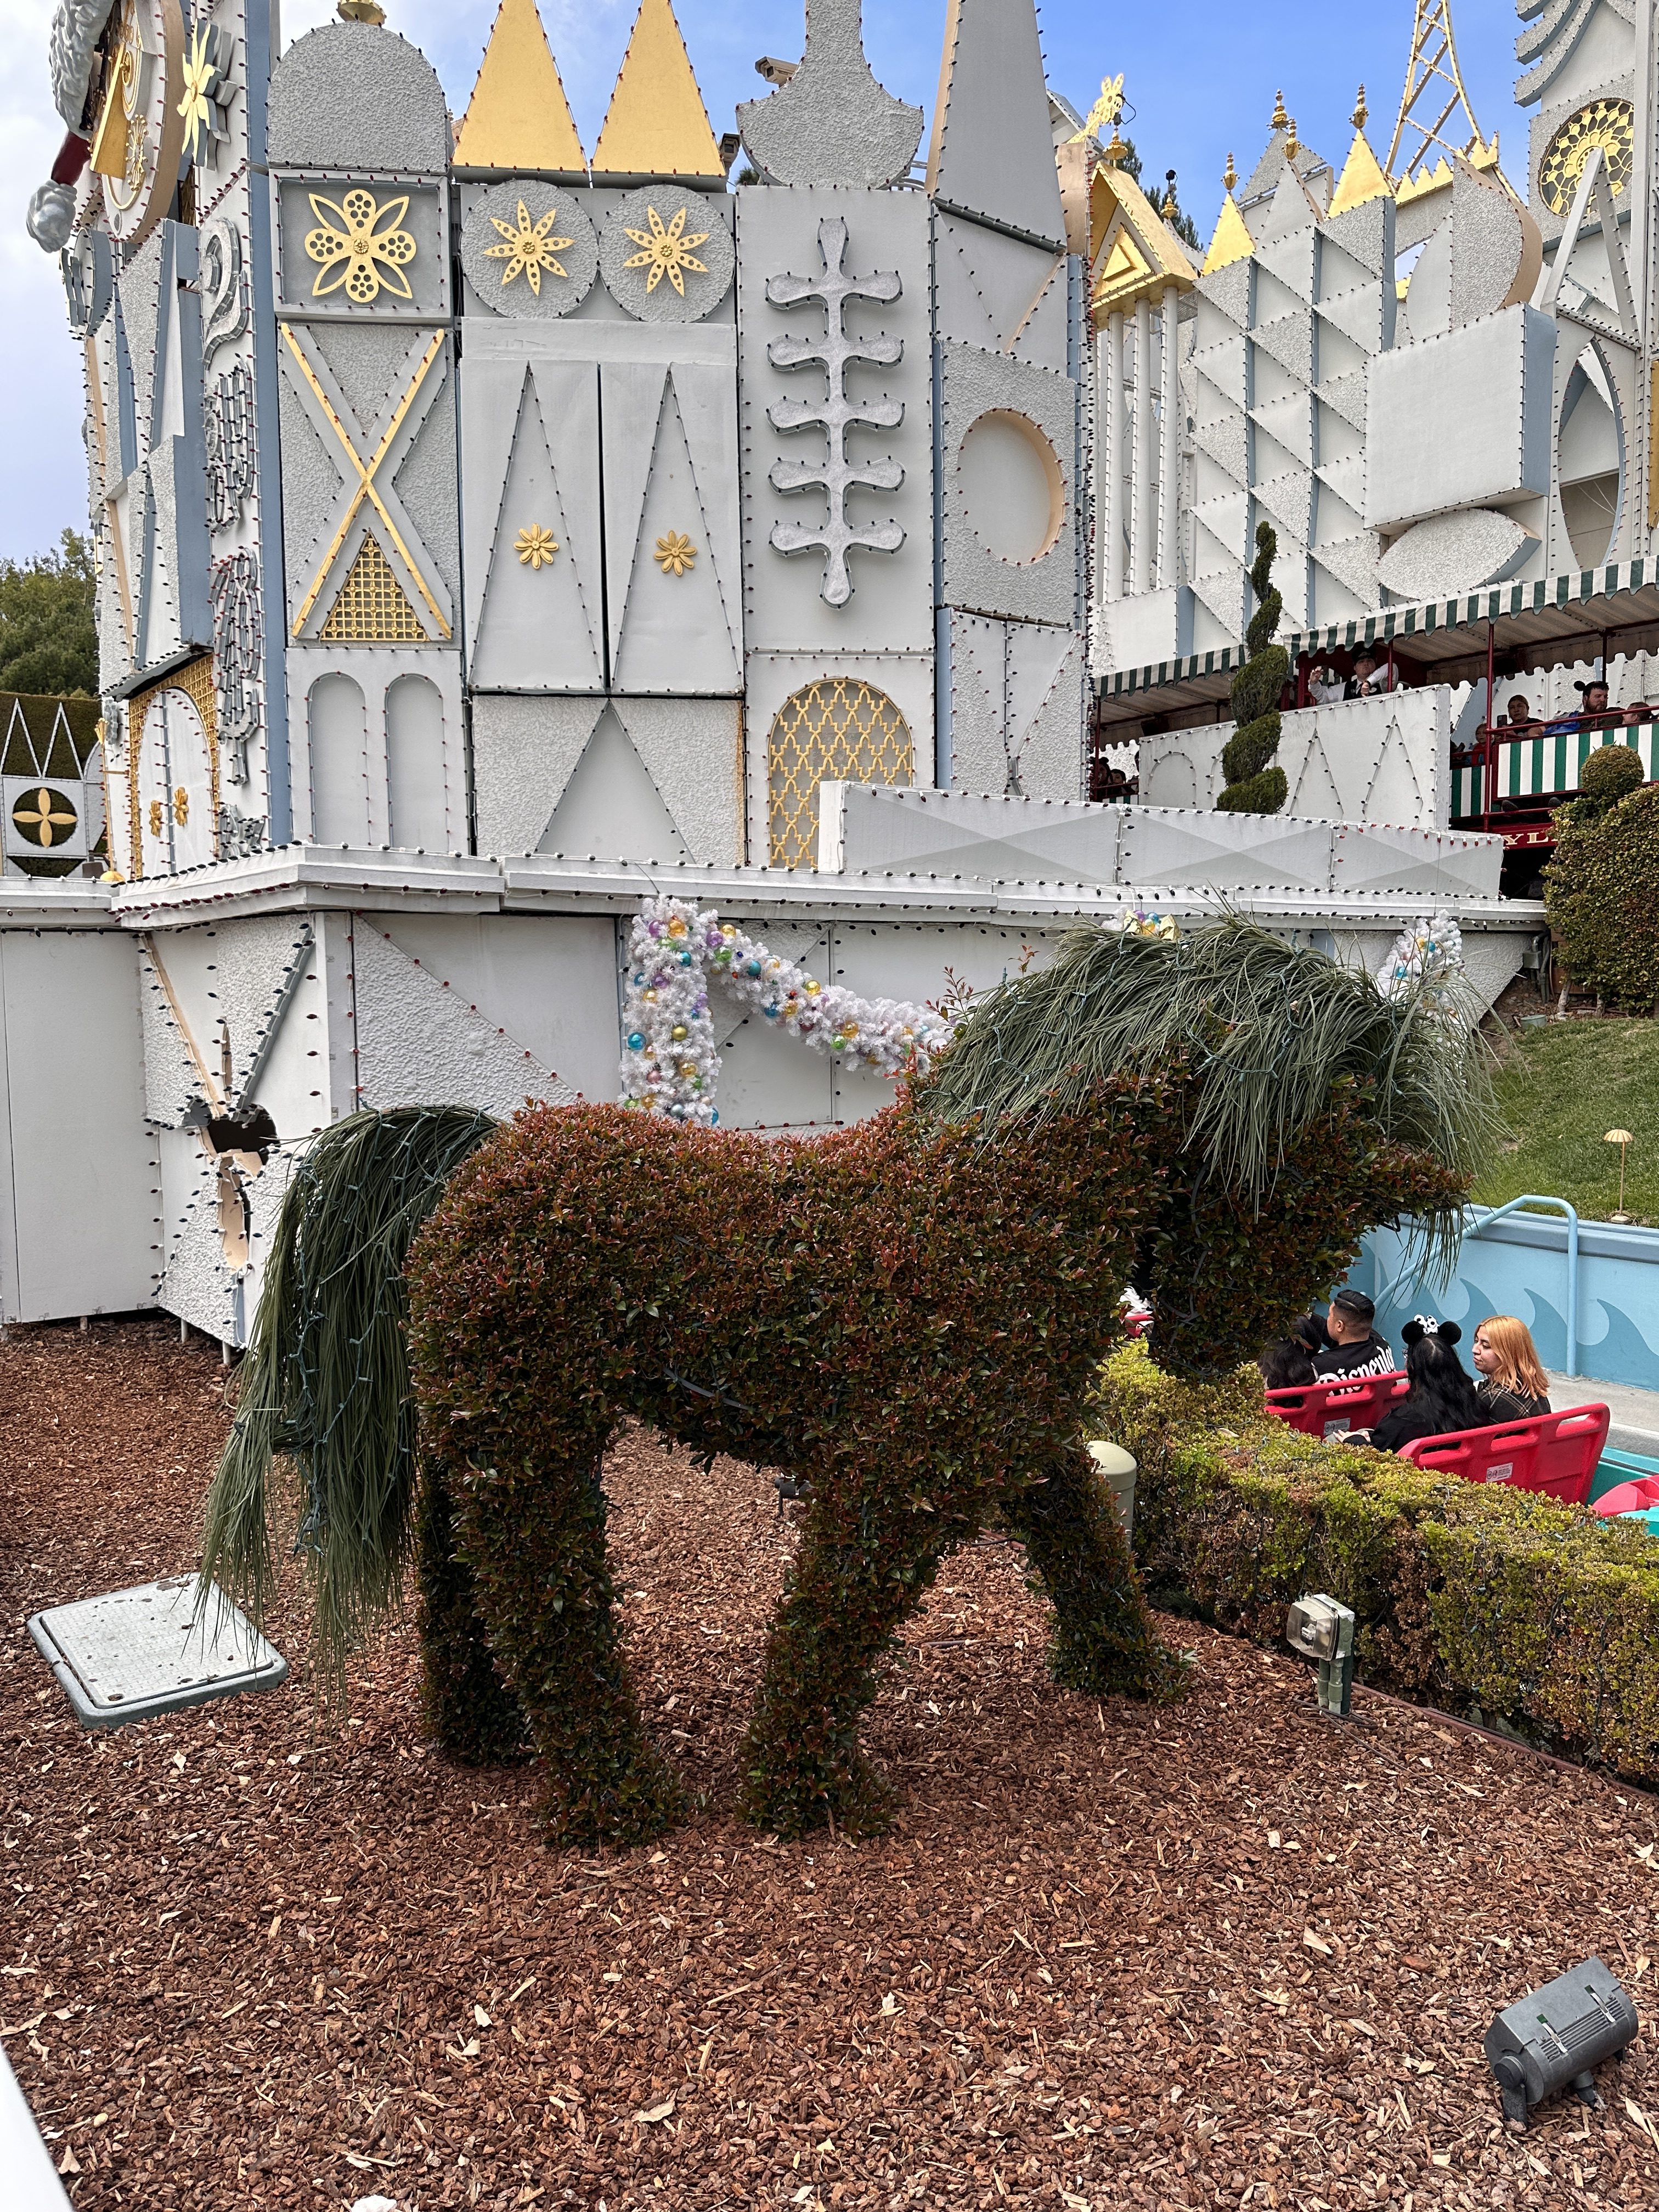 pony hedge at it's a small world holiday warm photographic style